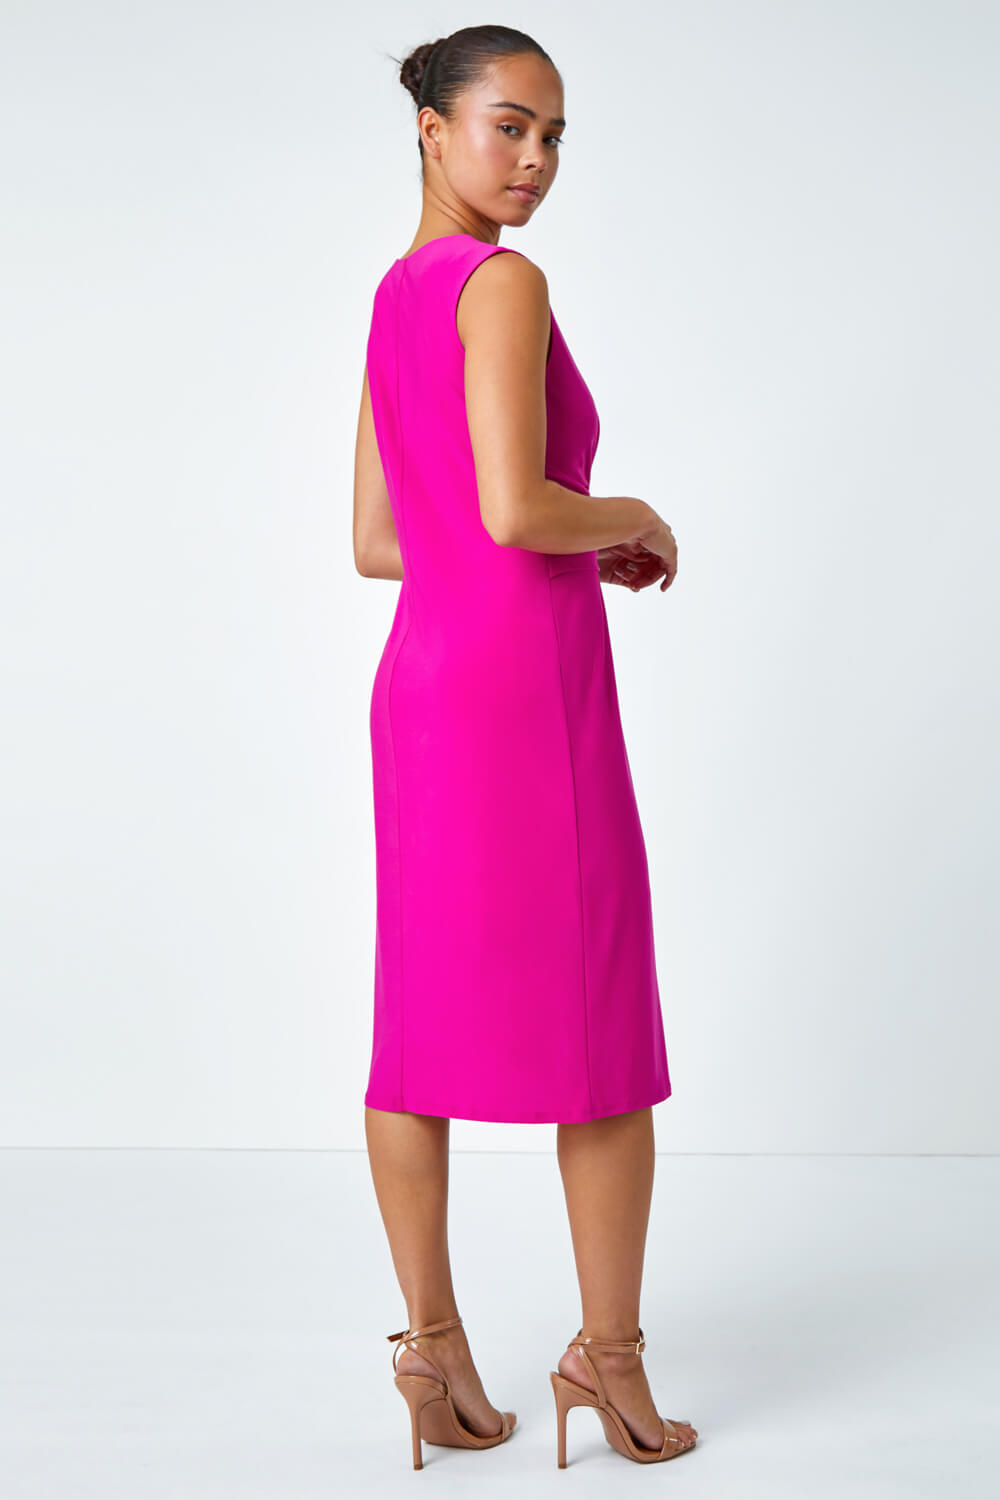 PINK Petite Buckle Waterfall Stretch Dress, Image 2 of 6